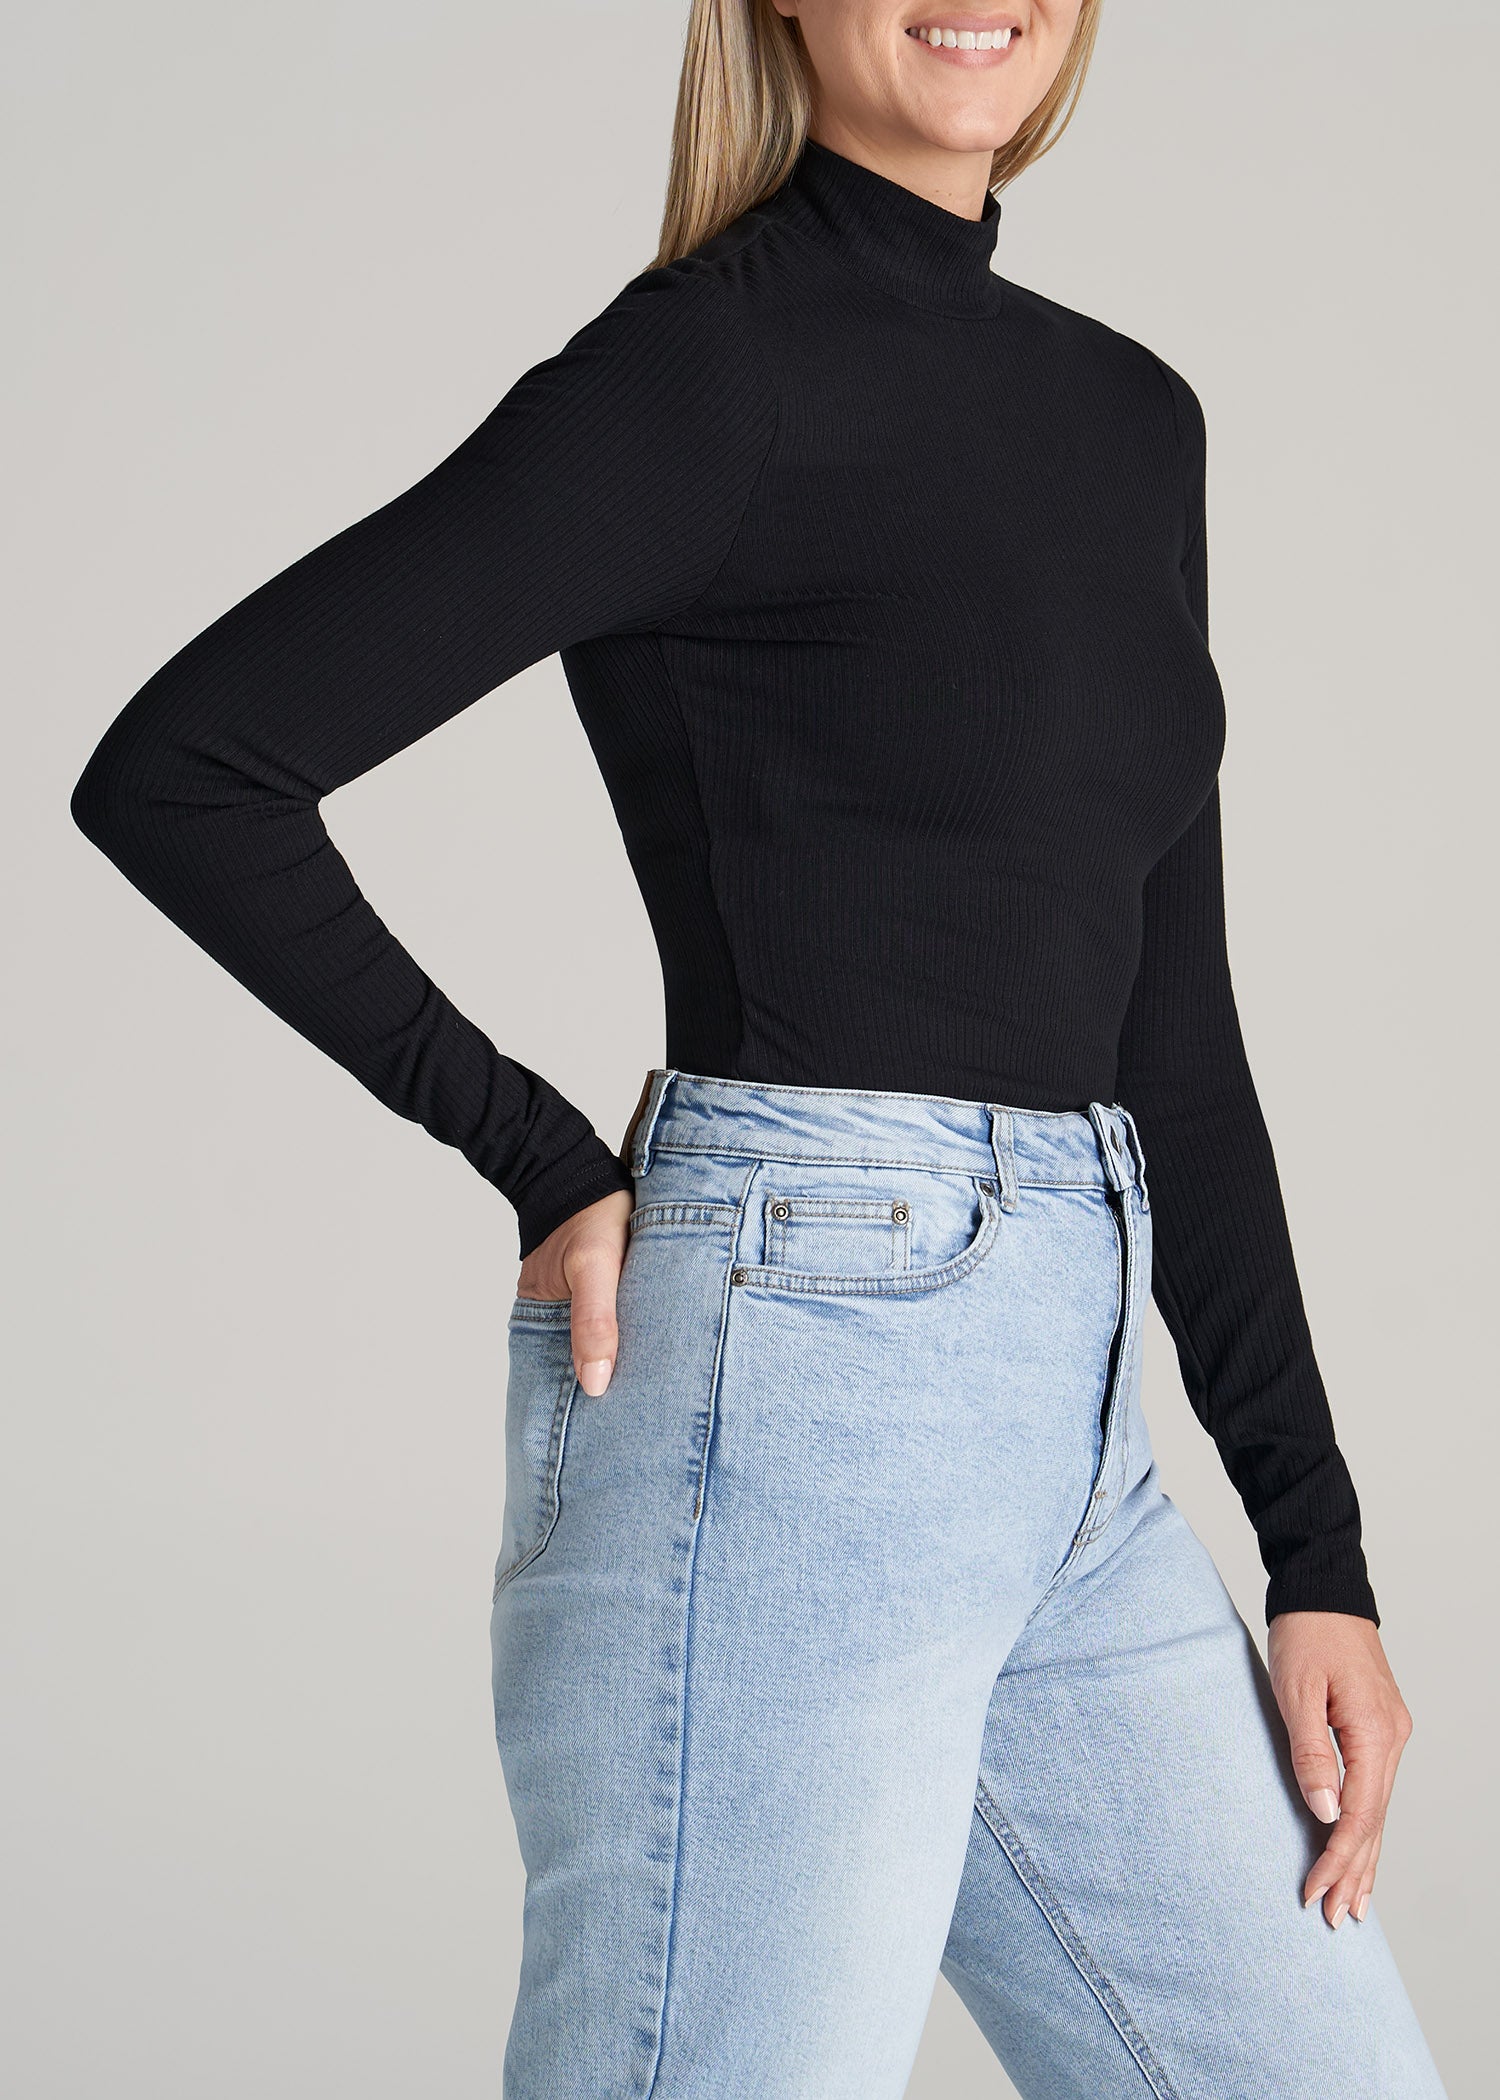 Long Sleeve Mock Neck Ribbed Top for Tall Women in Black